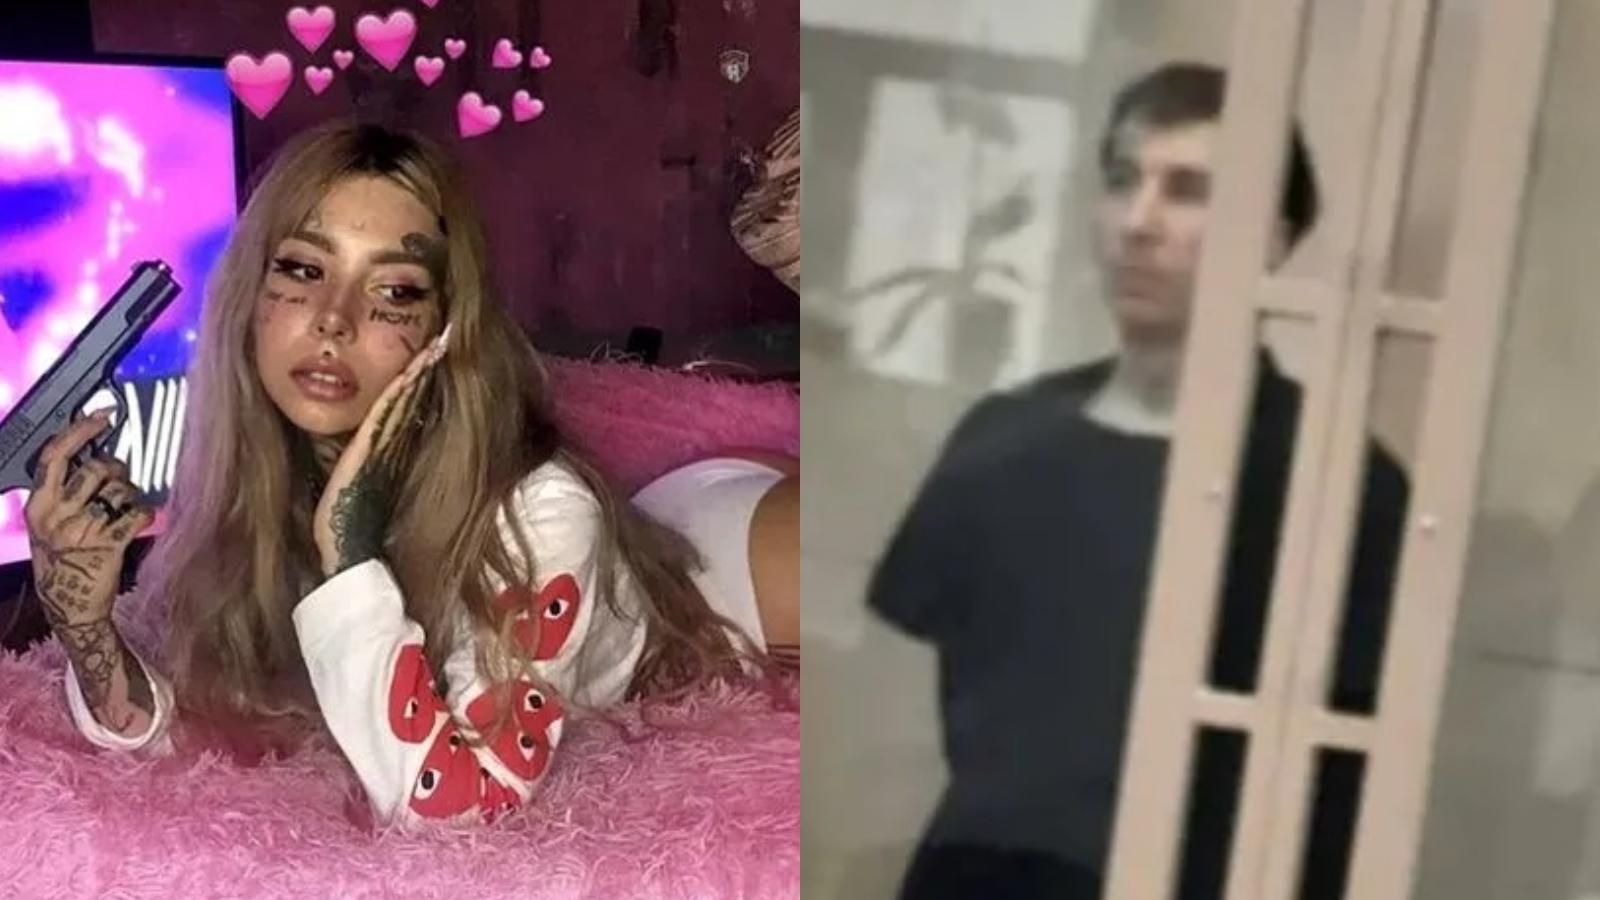 onlyfans model Anastasia Grishman and her husband behind bars